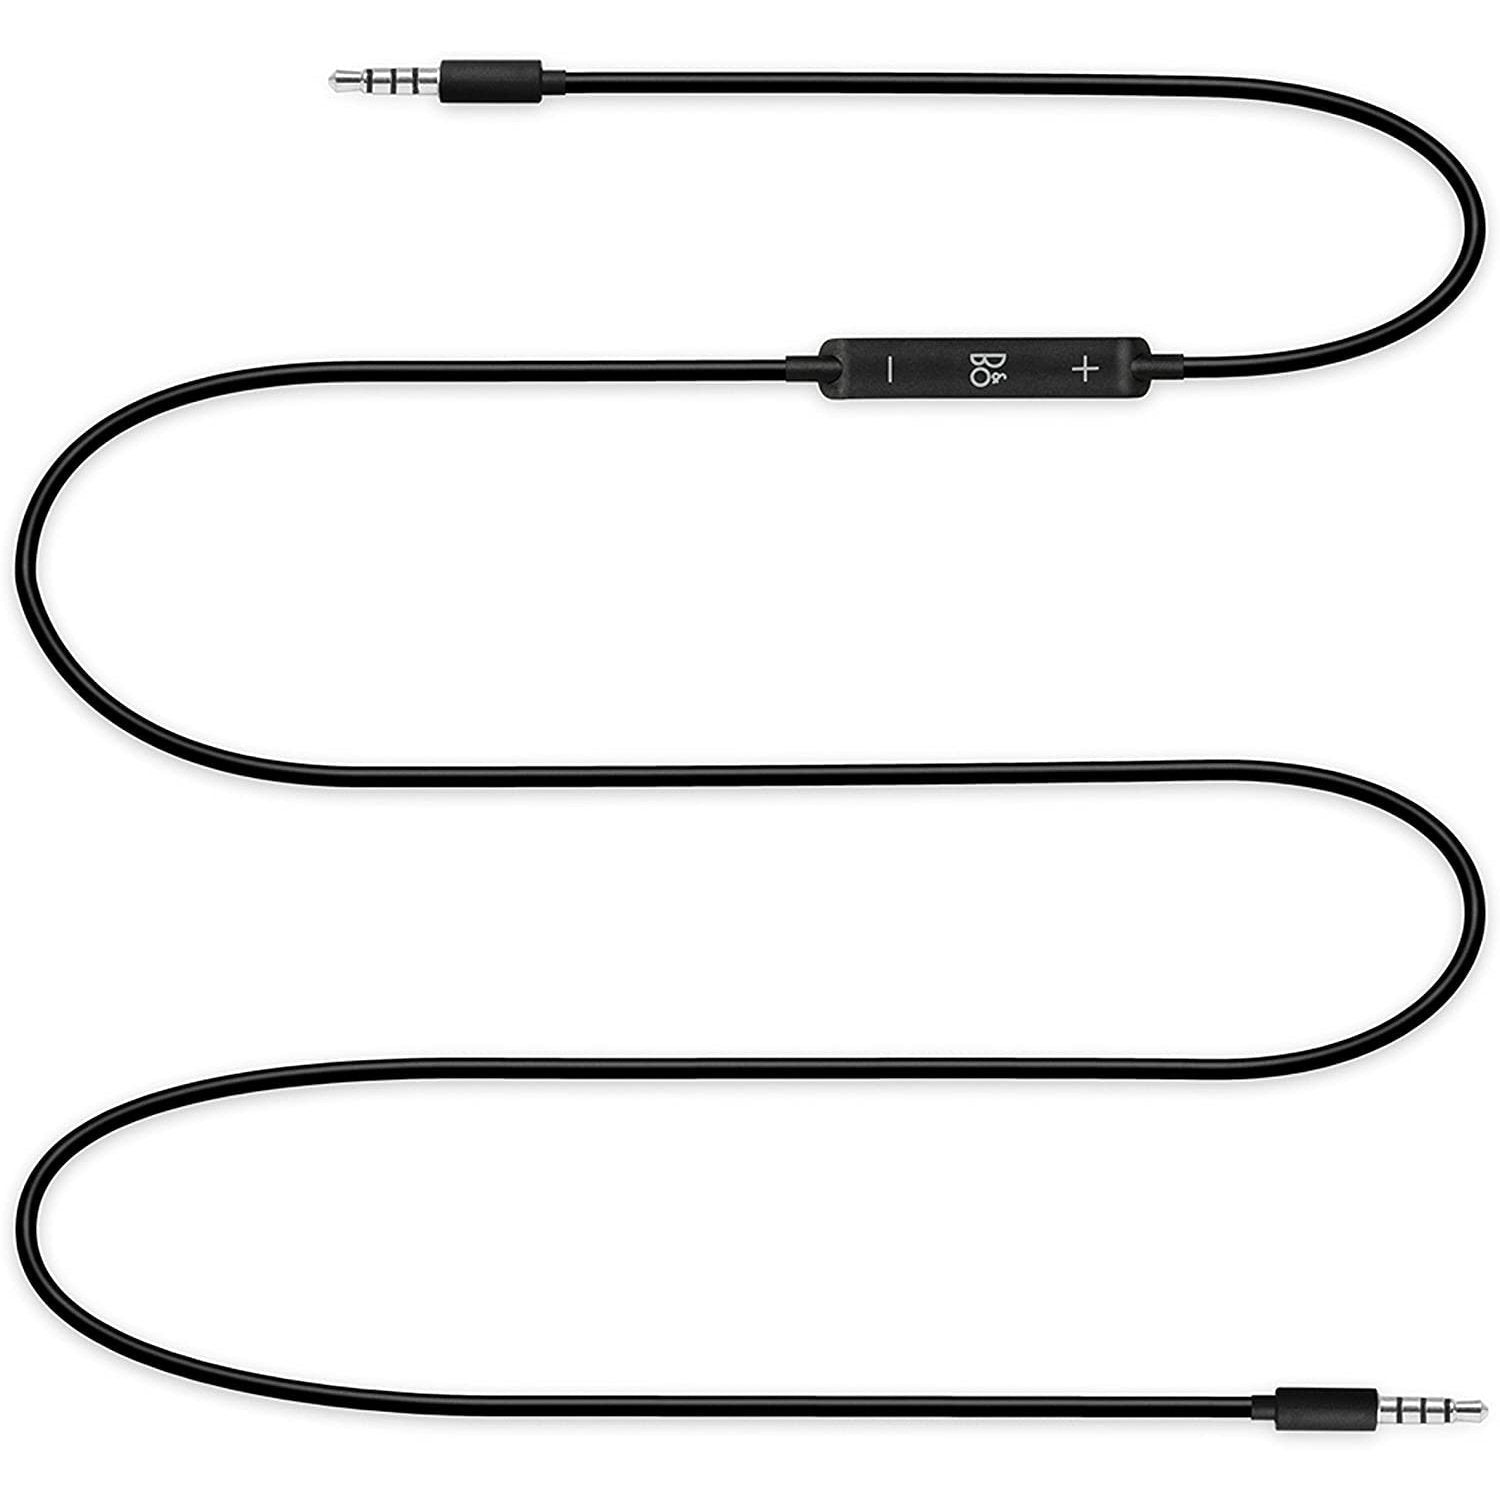 Bang & Olufsen - Cable with three button for IOS (Compatible with H2, H4, H6, H7, H8, H9) Australia